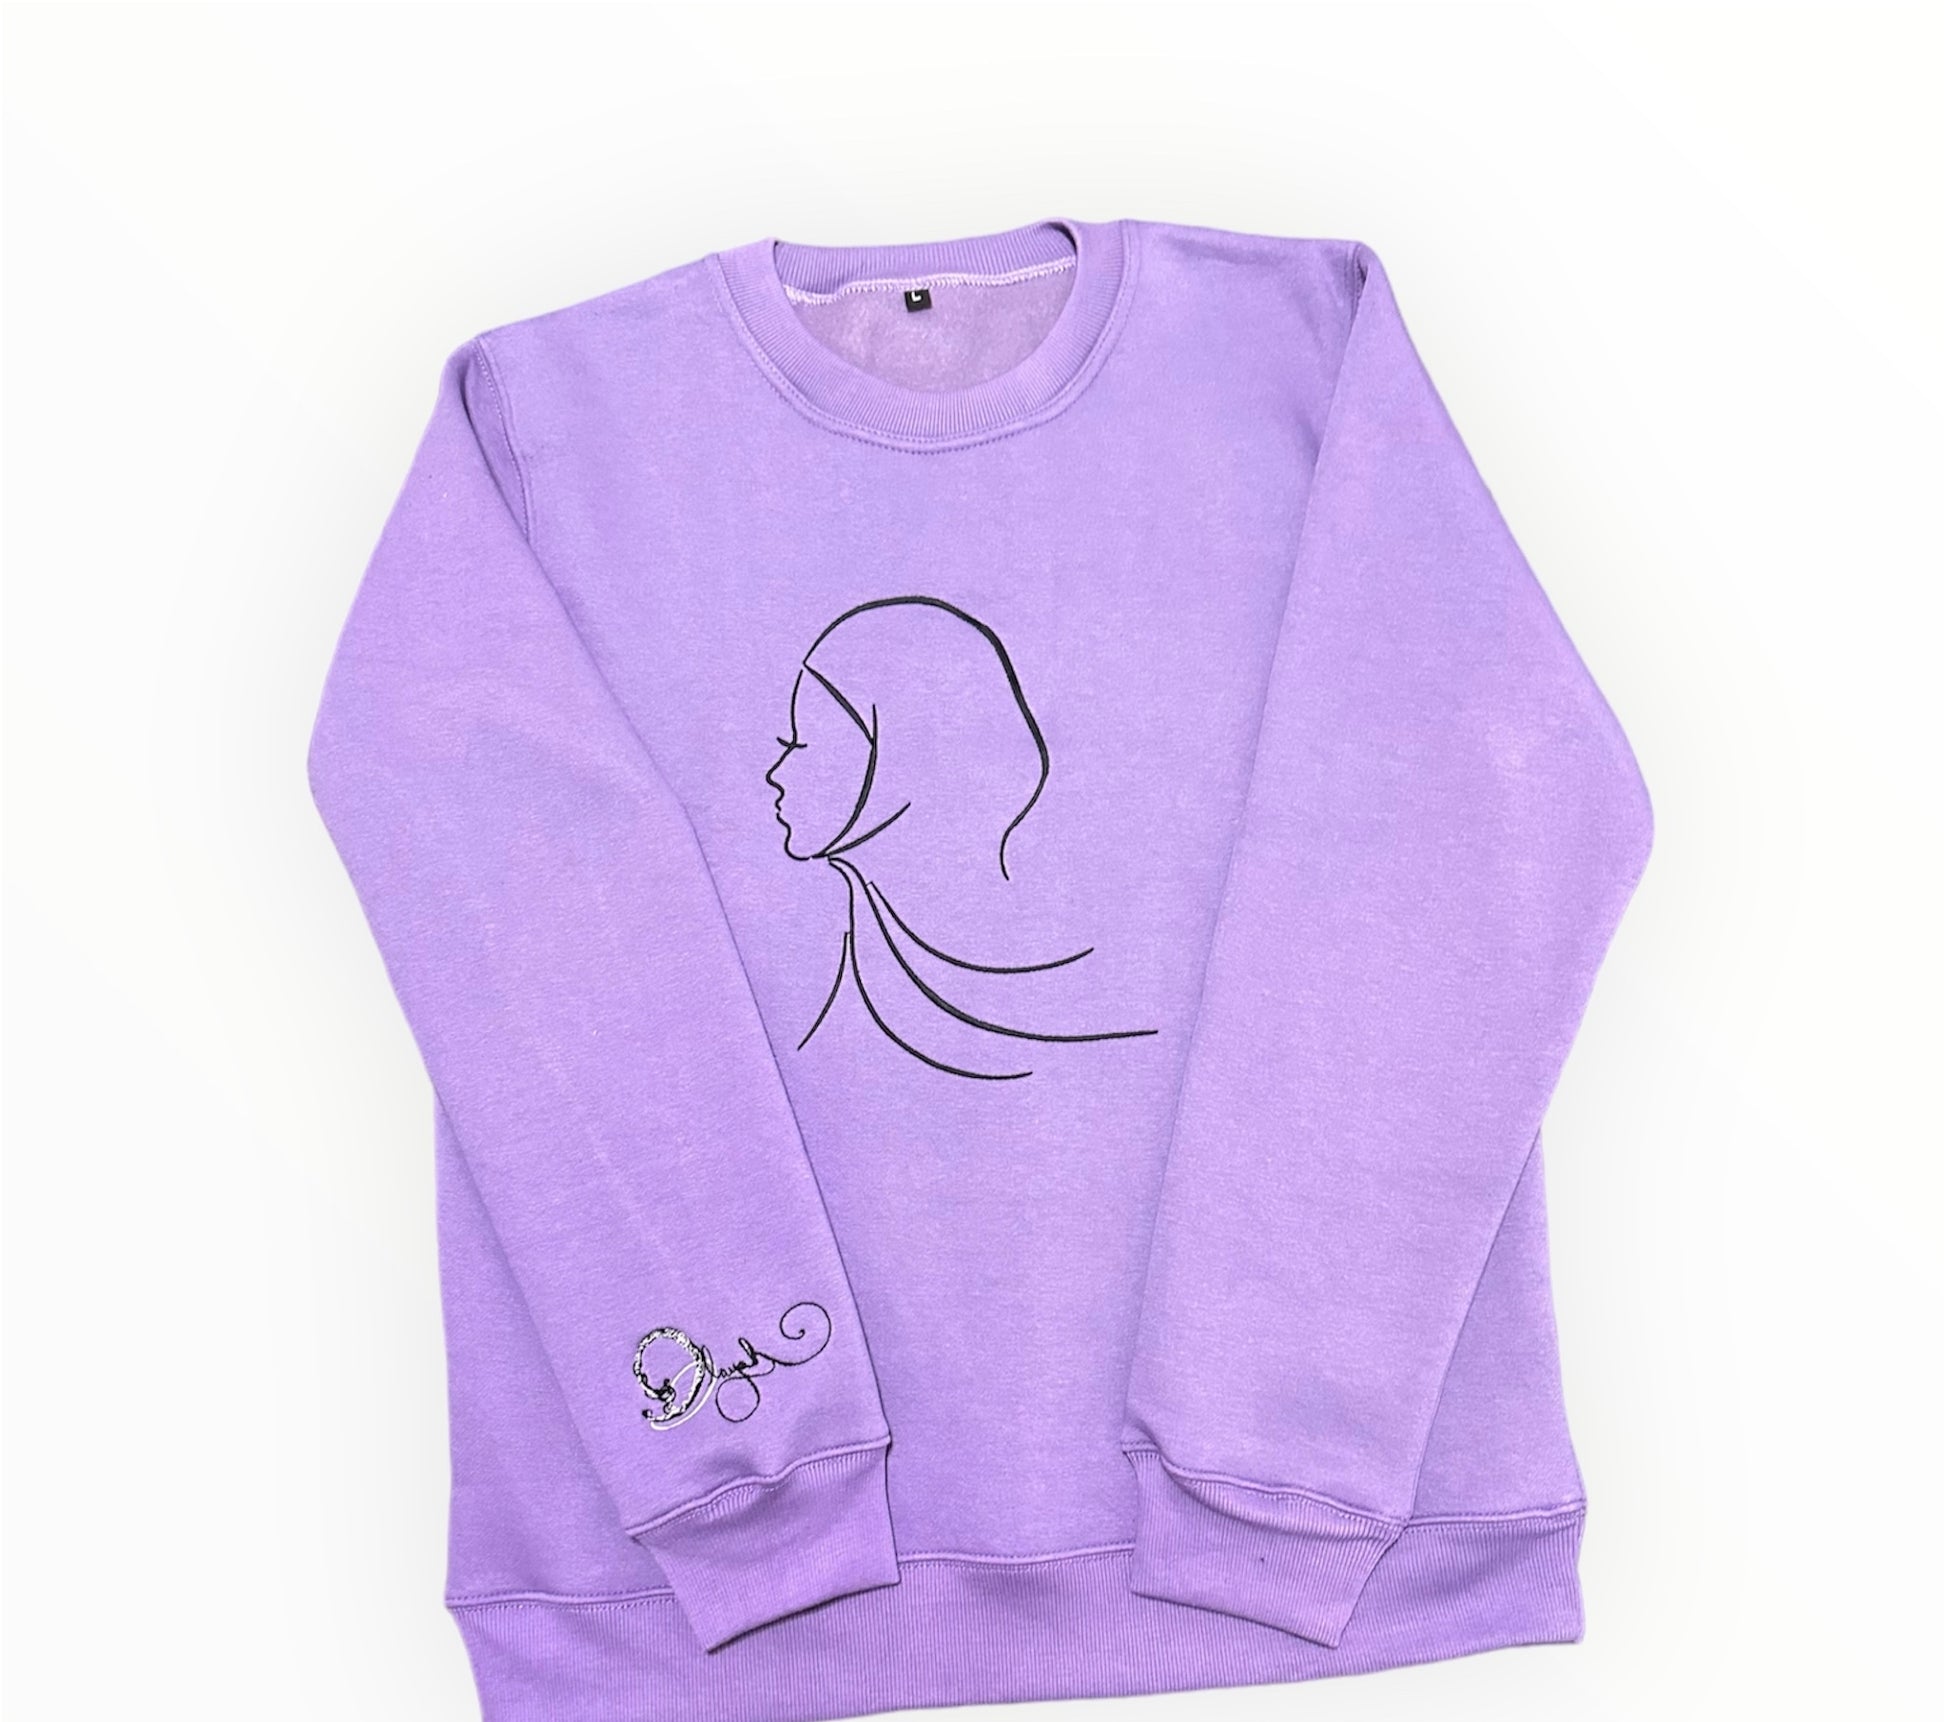 Covered girl Sweater (embroidery kids) - O'layah